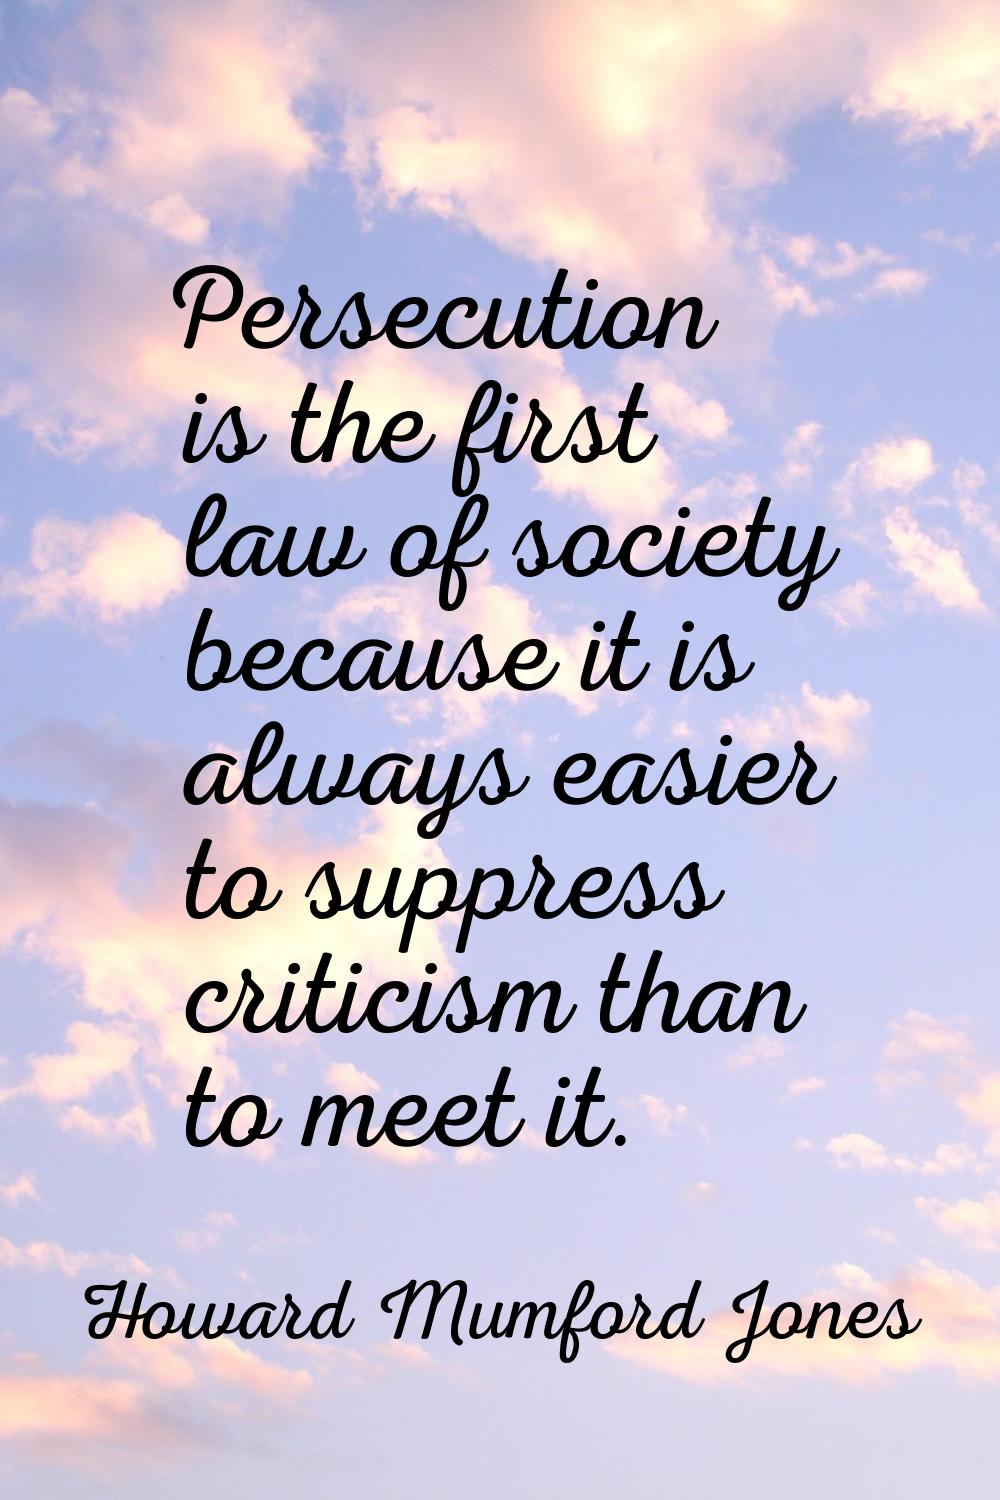 Persecution is the first law of society because it is always easier to suppress criticism than to m